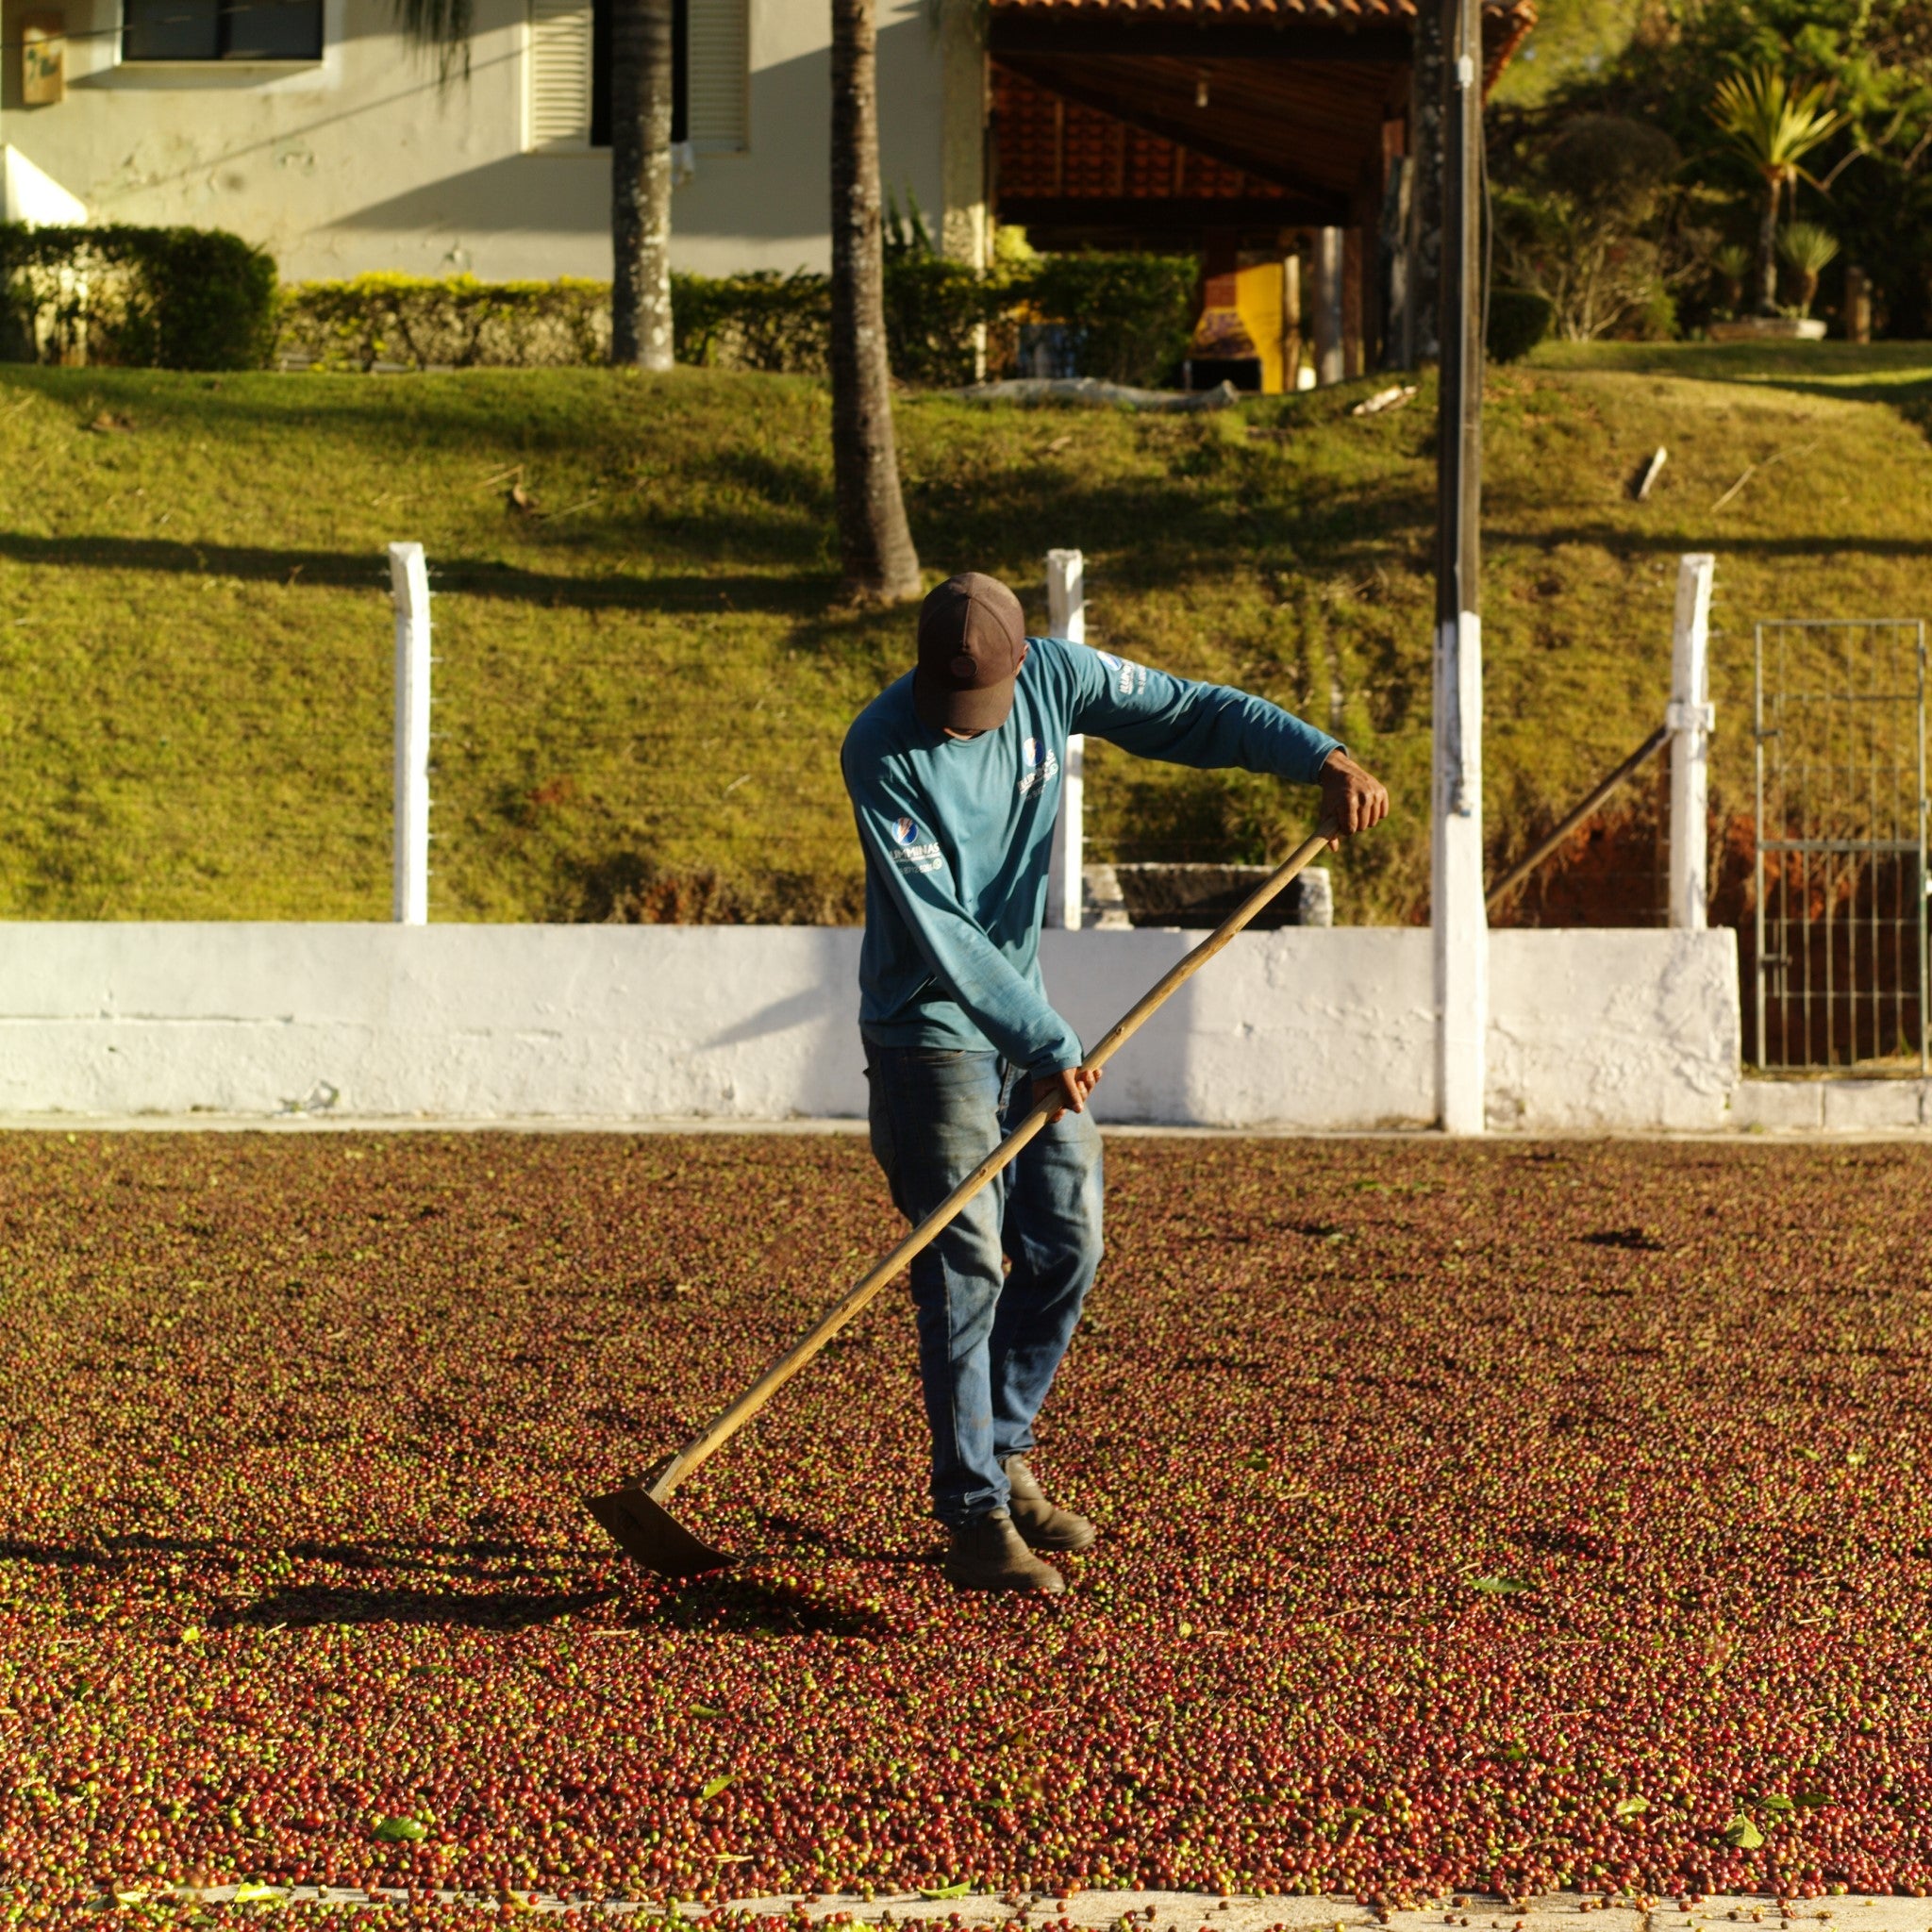 A worker uses a tool to spread speciality coffee drying in the sun on a patio at the Fazenda do Lobo farm in Brazil